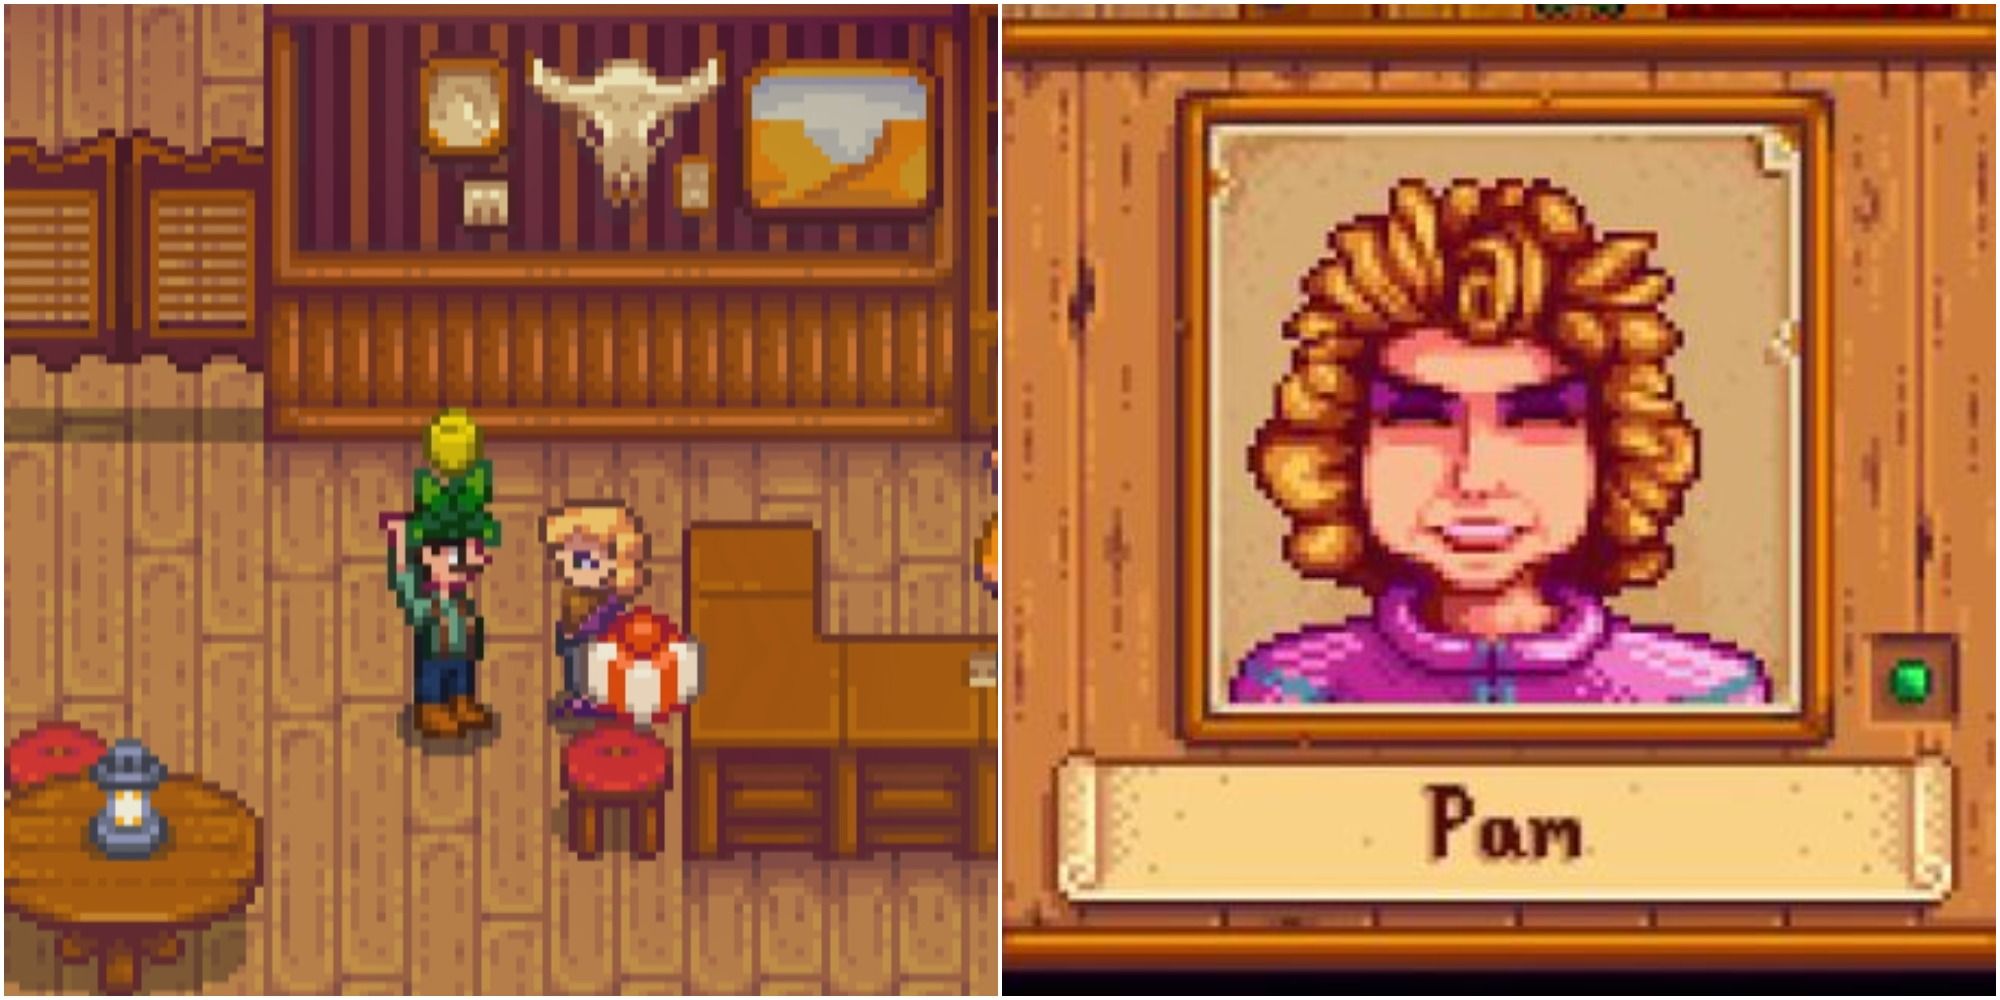 left: player giving pam a gift; right: Pam's smiling portrait